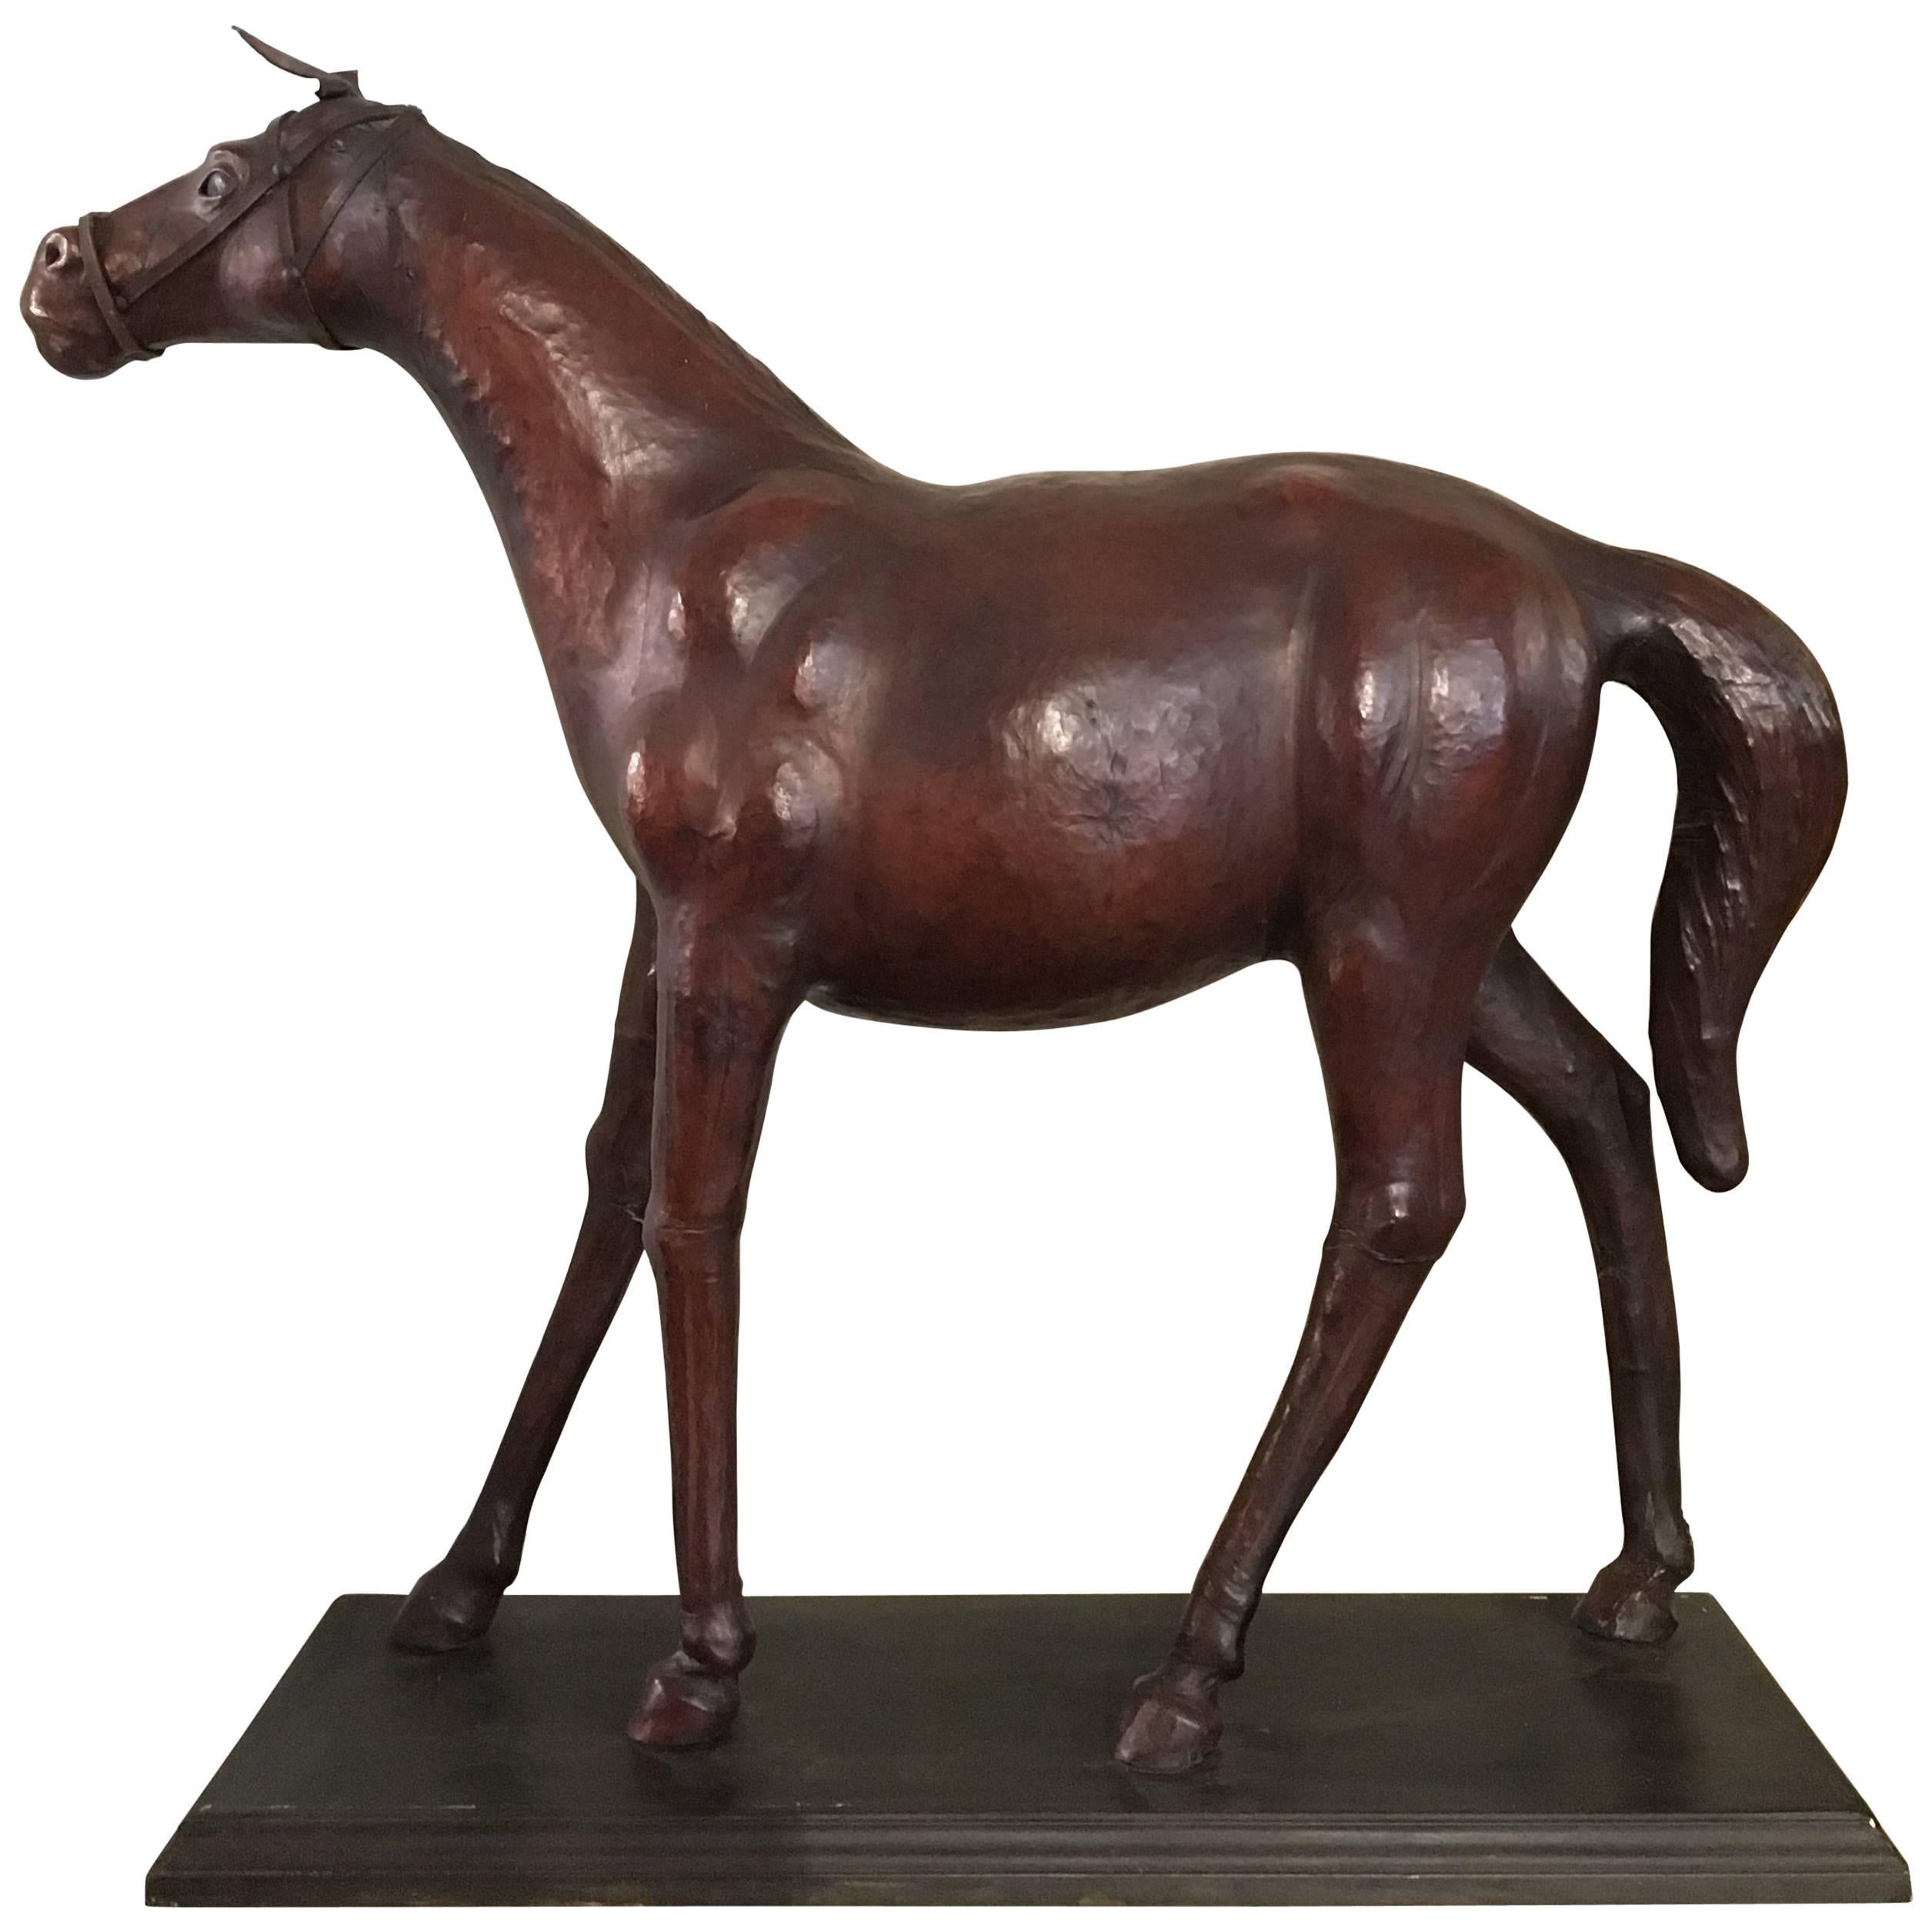 Late 19th Century French Handmade Leather Full Body Horse Sculpture or Model